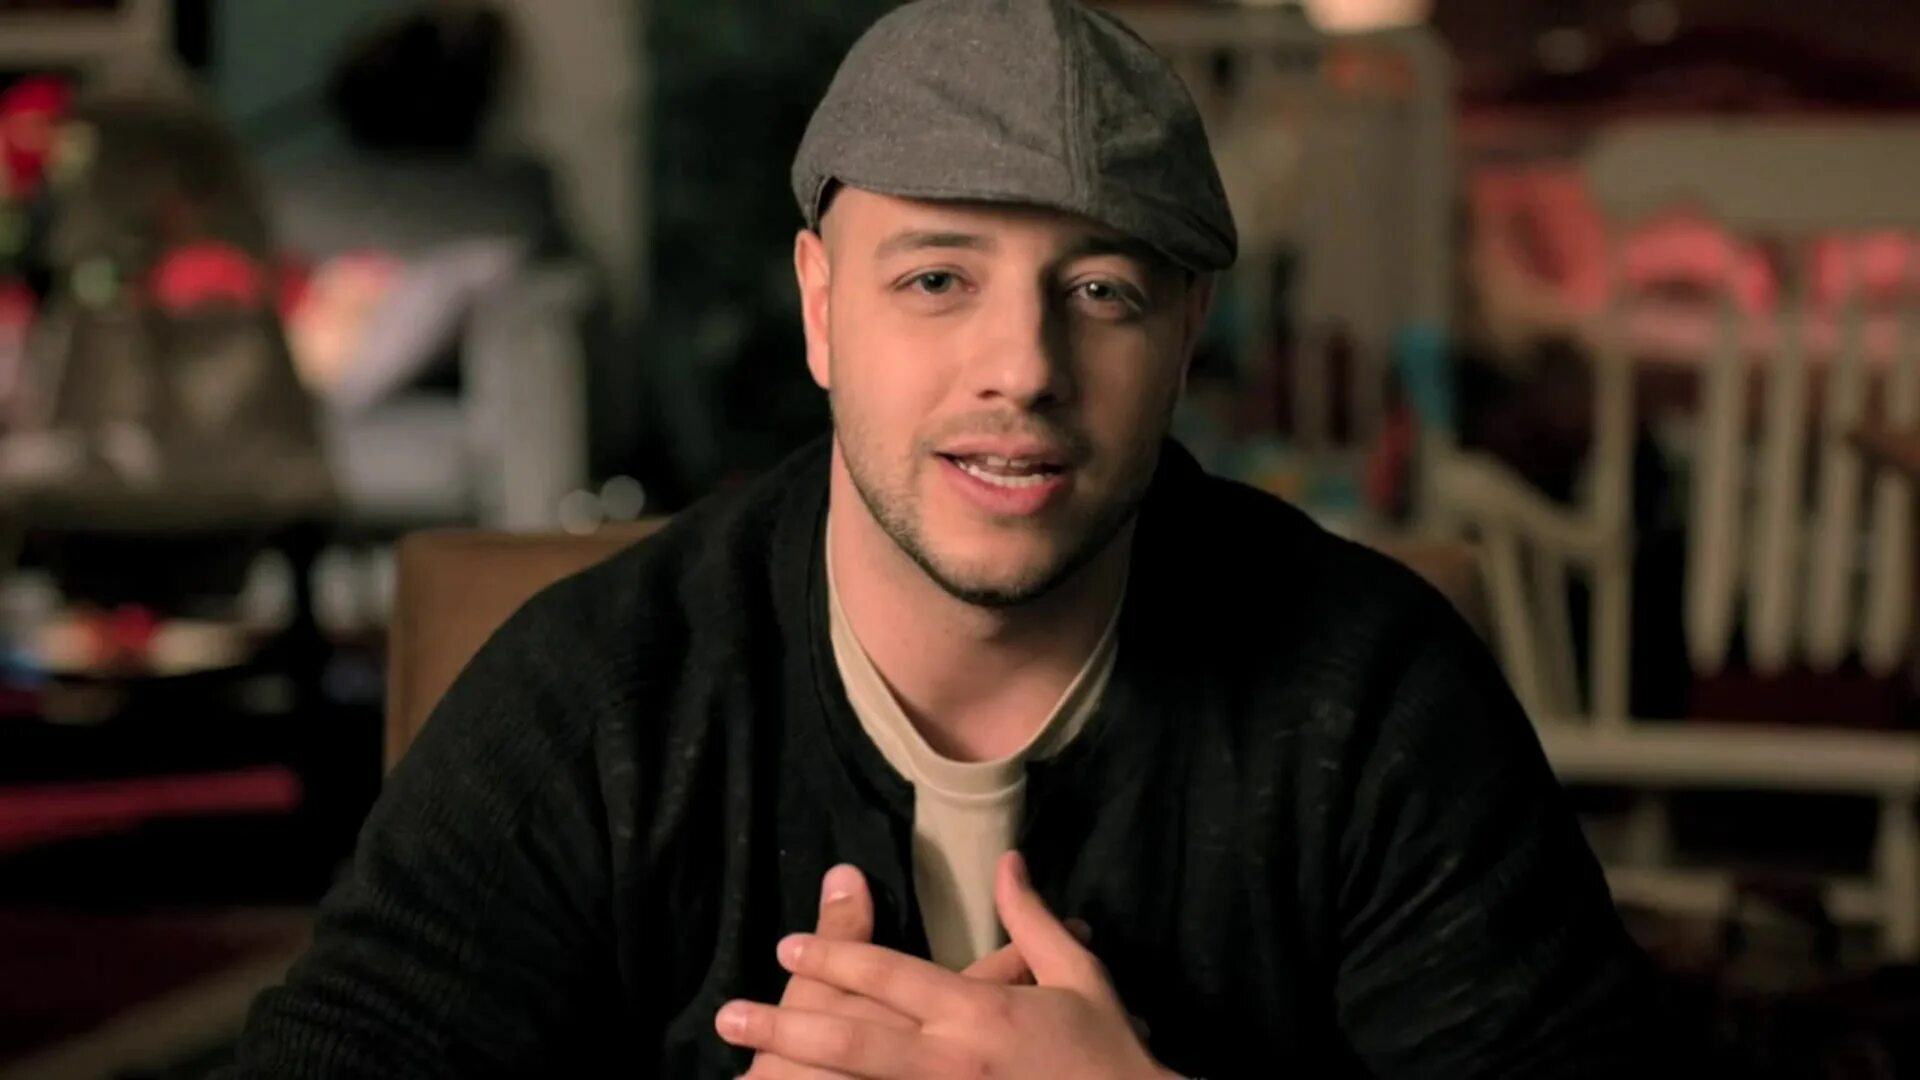 For the rest of my life песня. Махер Зейн. Махер Зейн for the rest. Maher Zain for the. Maher Zain for the rest of my Life.